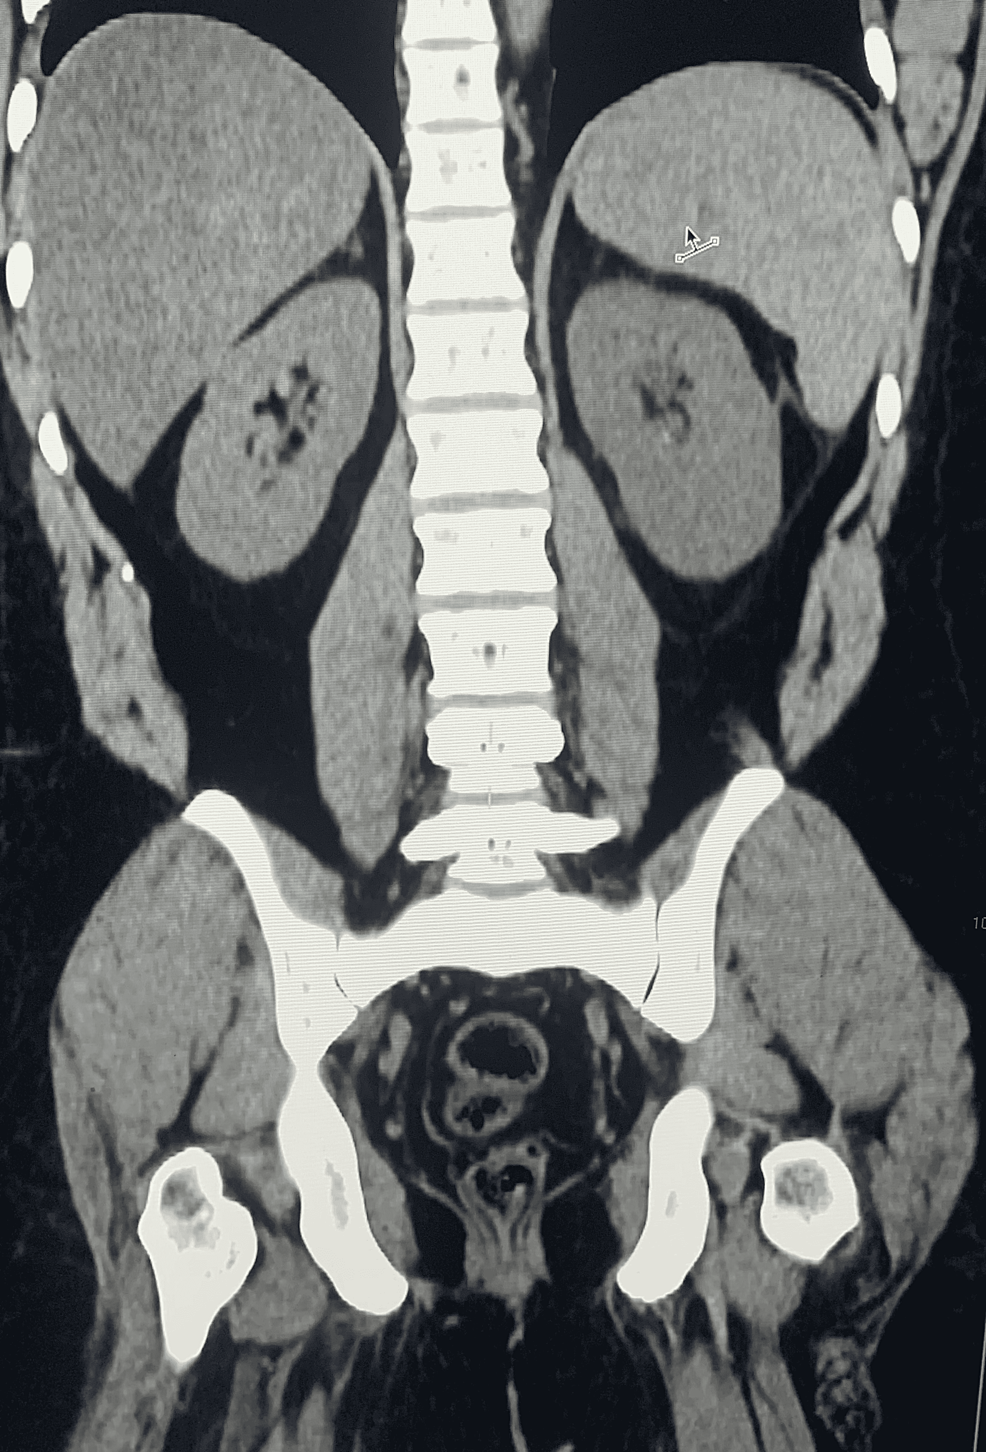 CT-scan-of-abdomen-(coronal-view-without-contrast)-shows:-liver-is-enlarged-with-diffuse-fatty-infiltration;-gallbladder-is-normal-without-any-intraluminal-calculus;-adrenals-and-pancreas-are-unremarkable;-spleen-is-enlarged-and-measures-26-cm-with-homogenous-texture.